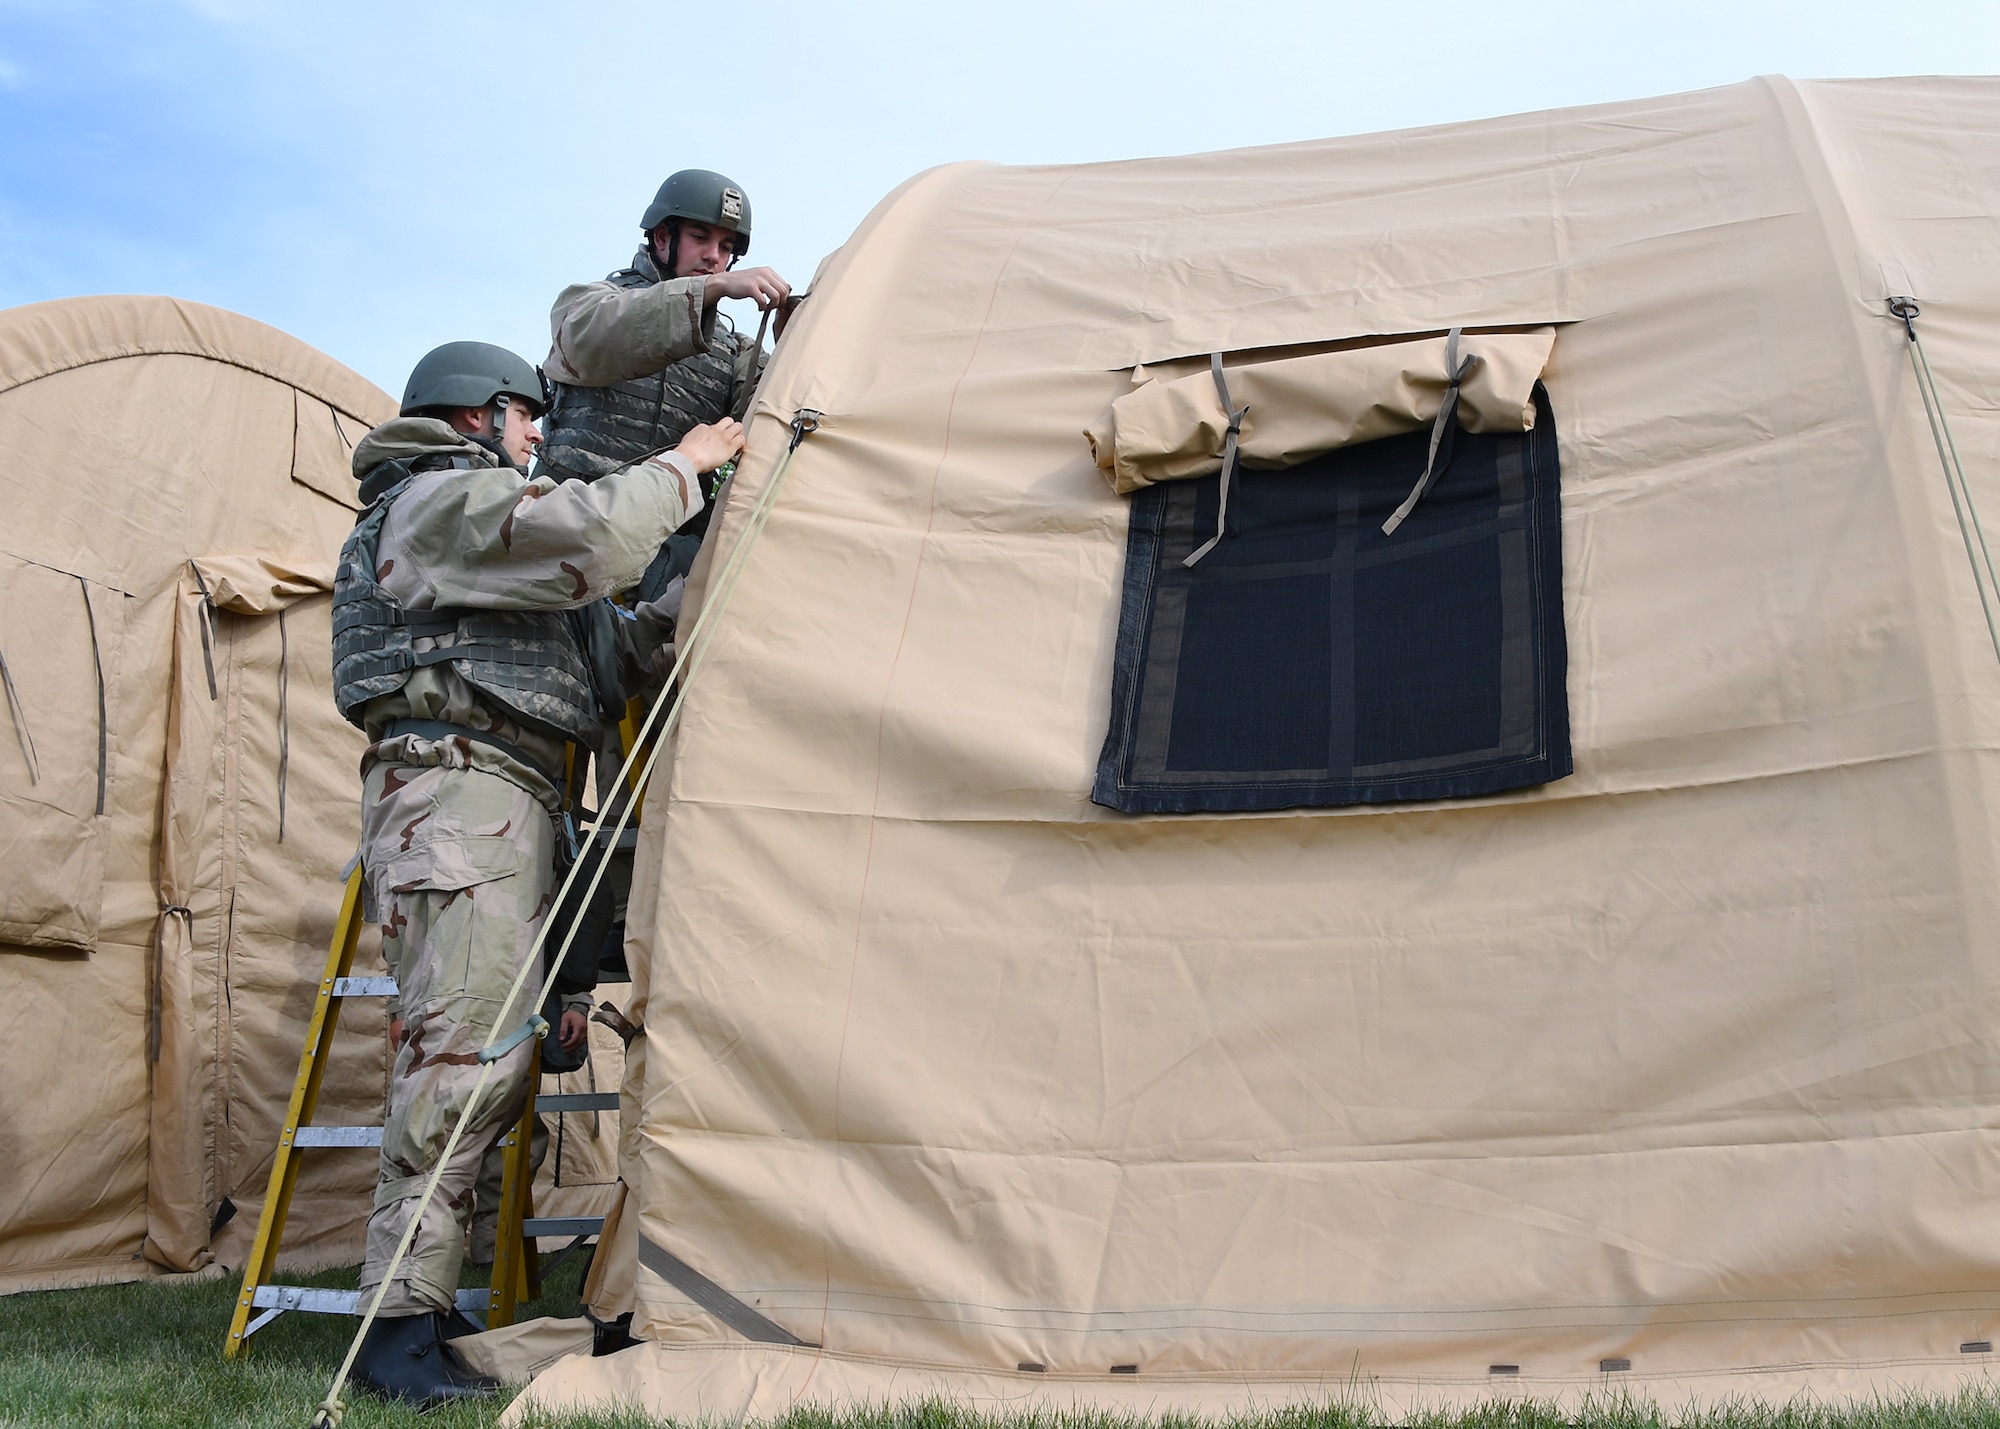 Airmen with the 319th Civil Engineer Squadron work together to erect shelter systems as part of a training June 1, 2018, on Fargo Air National Guard Base, North Dakota. The training allowed the Airmen to hone their skills and prepare them to build “tent cities” as they might on deployments. The 319 CES participated in a three-day mission essential equipment training, which allowed multiple crafts within the squadron to practice their war-time efforts. (U.S. Air Force photo by Airman 1st Class Elora J. Martinez)